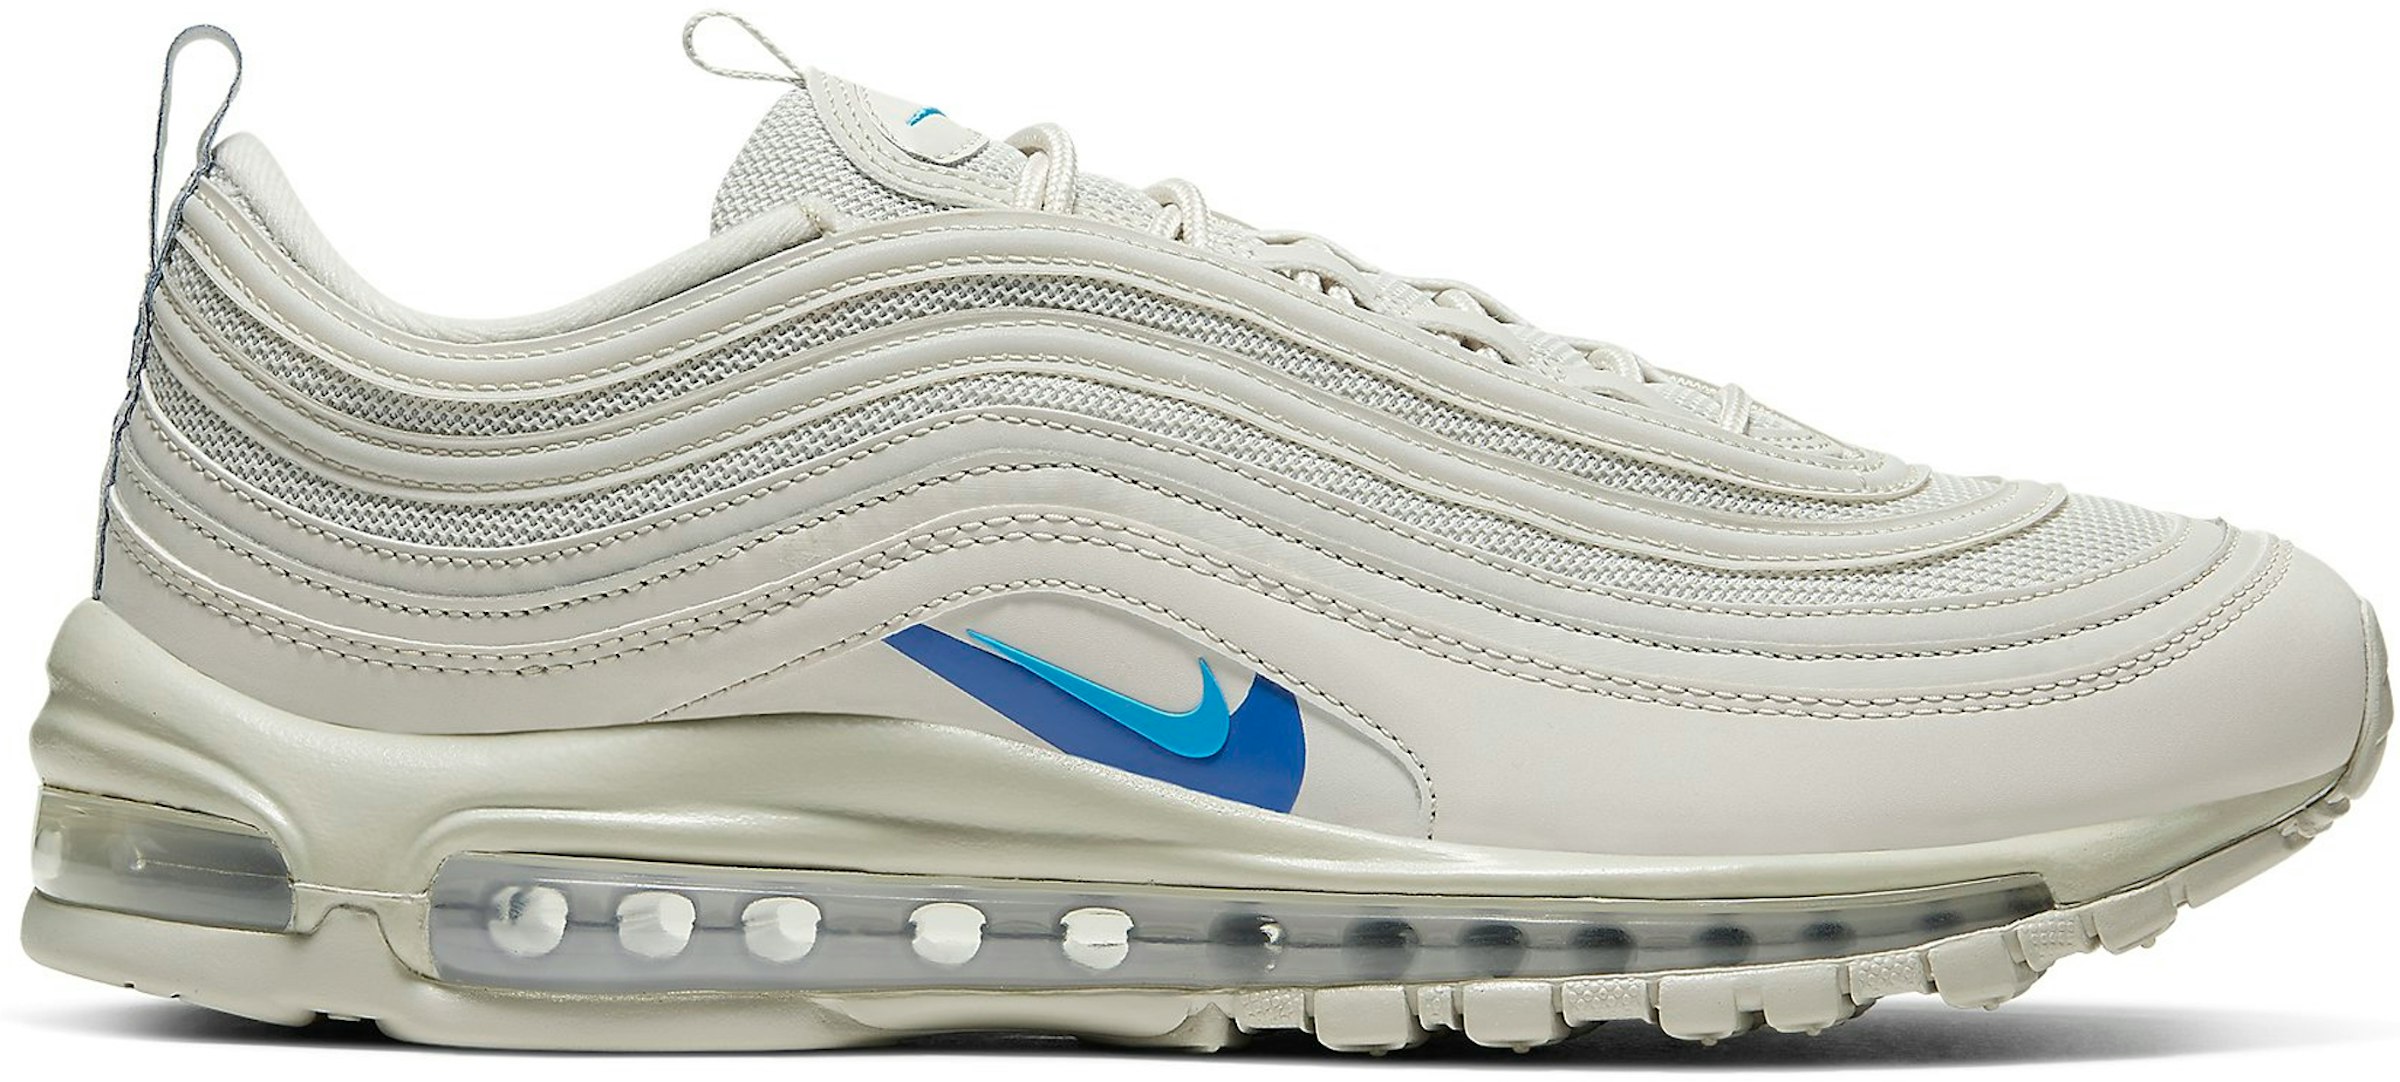 Nike Air Max 97 Just Do It White - CT2205-001 - US